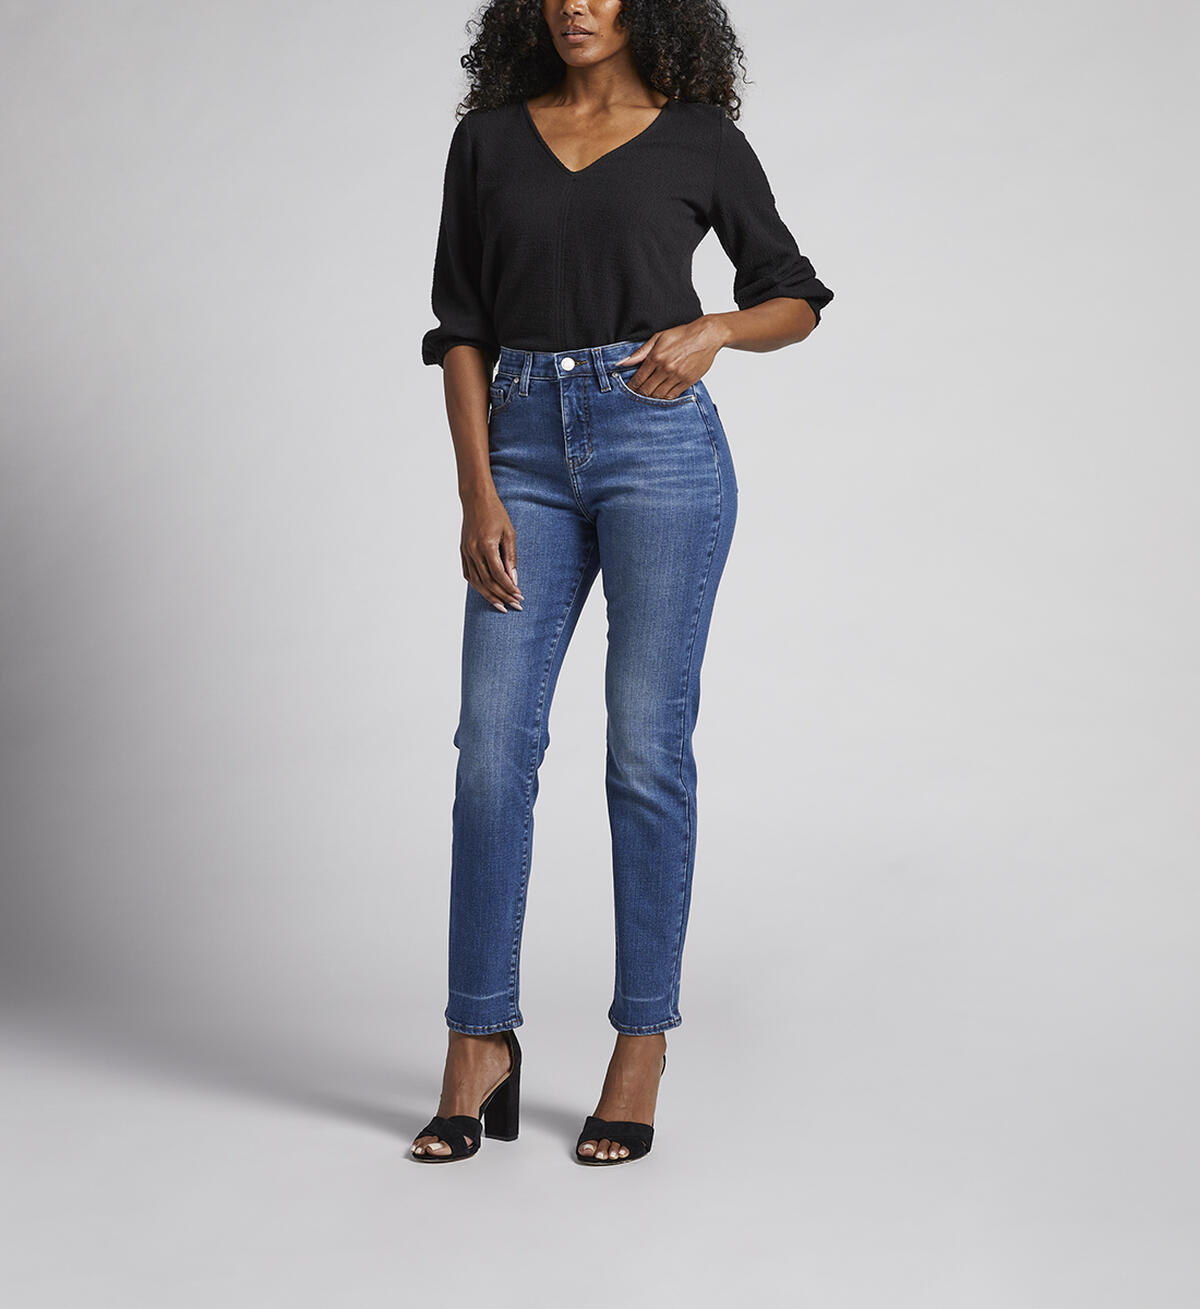 Stella 30-Inch High Rise Straight Leg Jeans, , hi-res image number 0